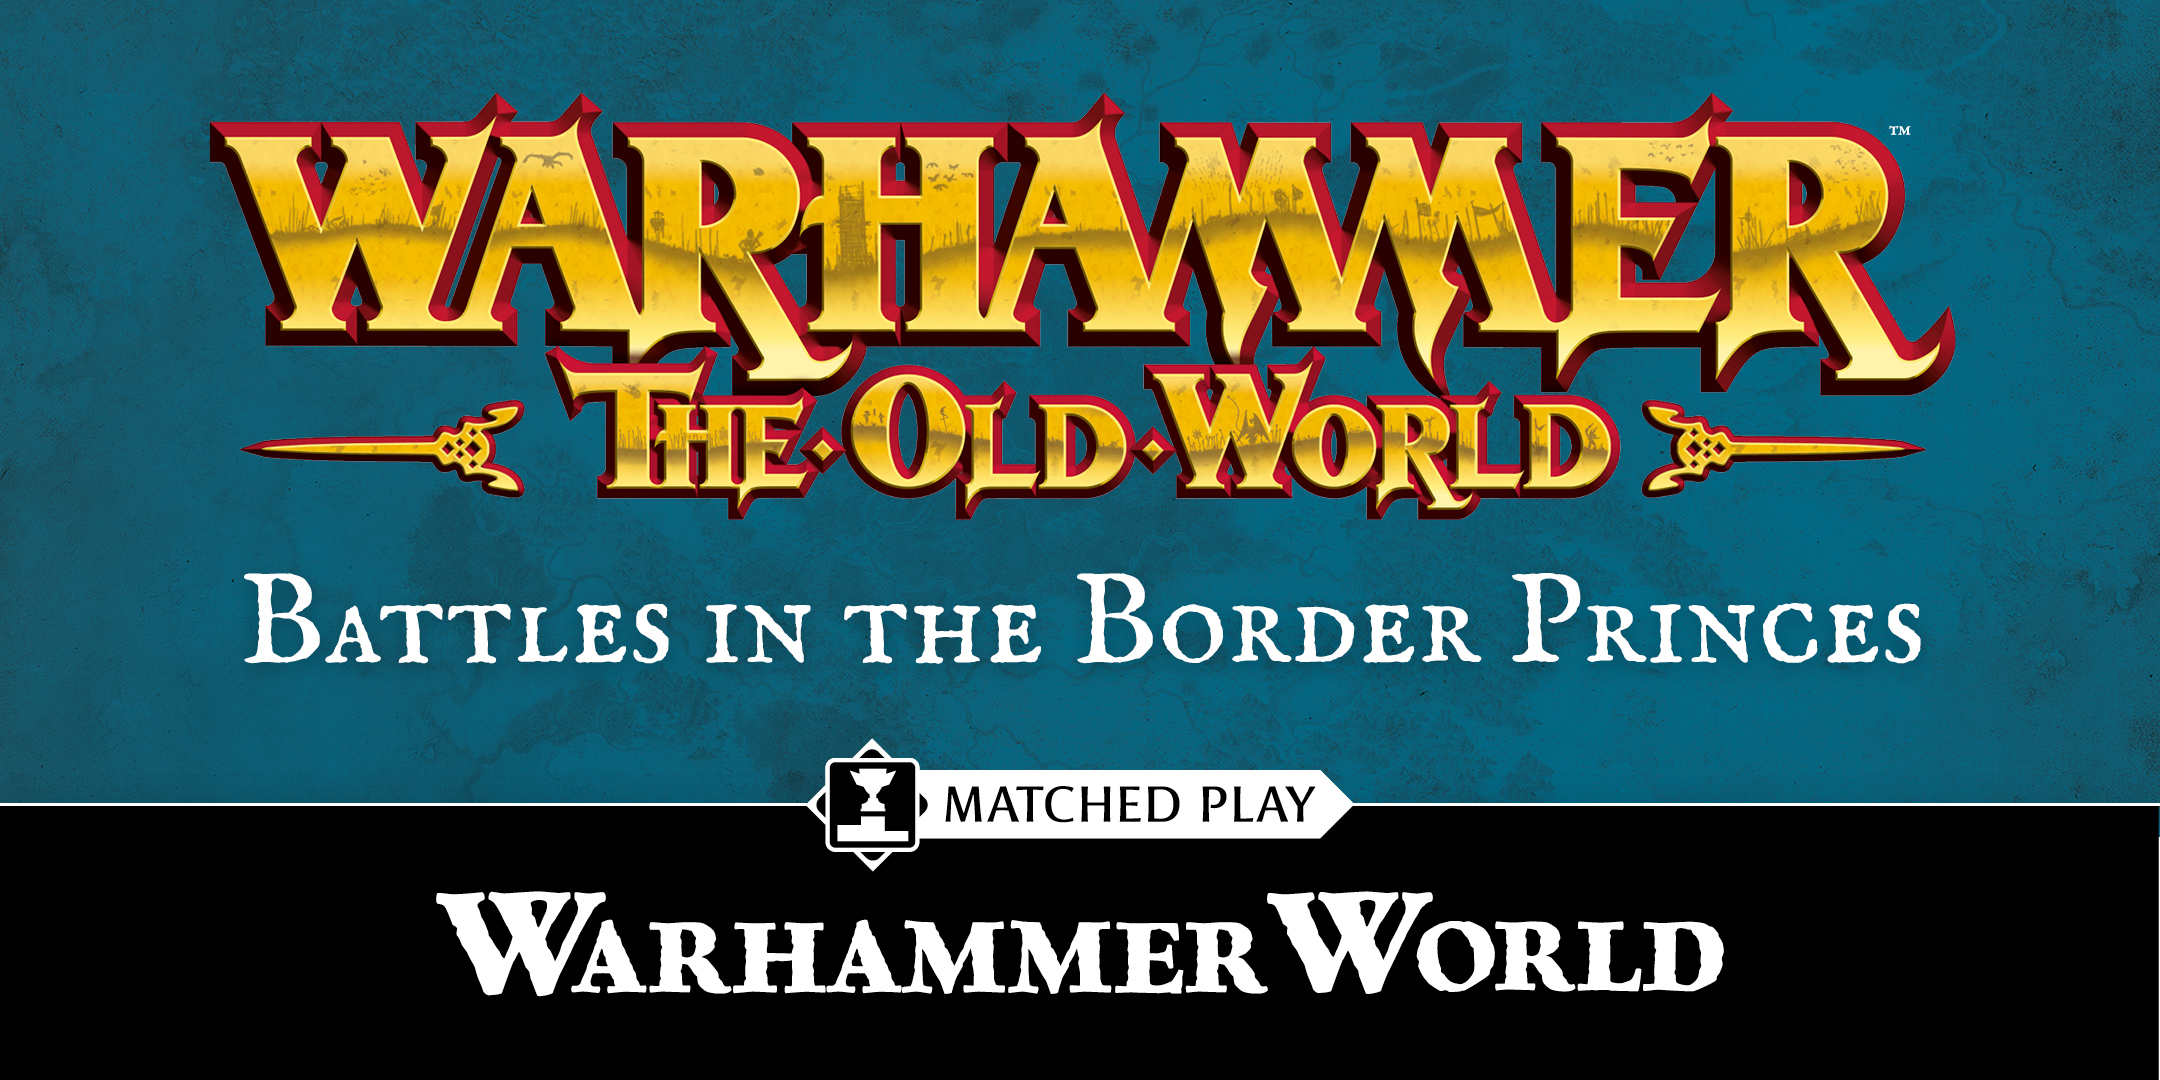 The Old World: Battles in the Border Princes